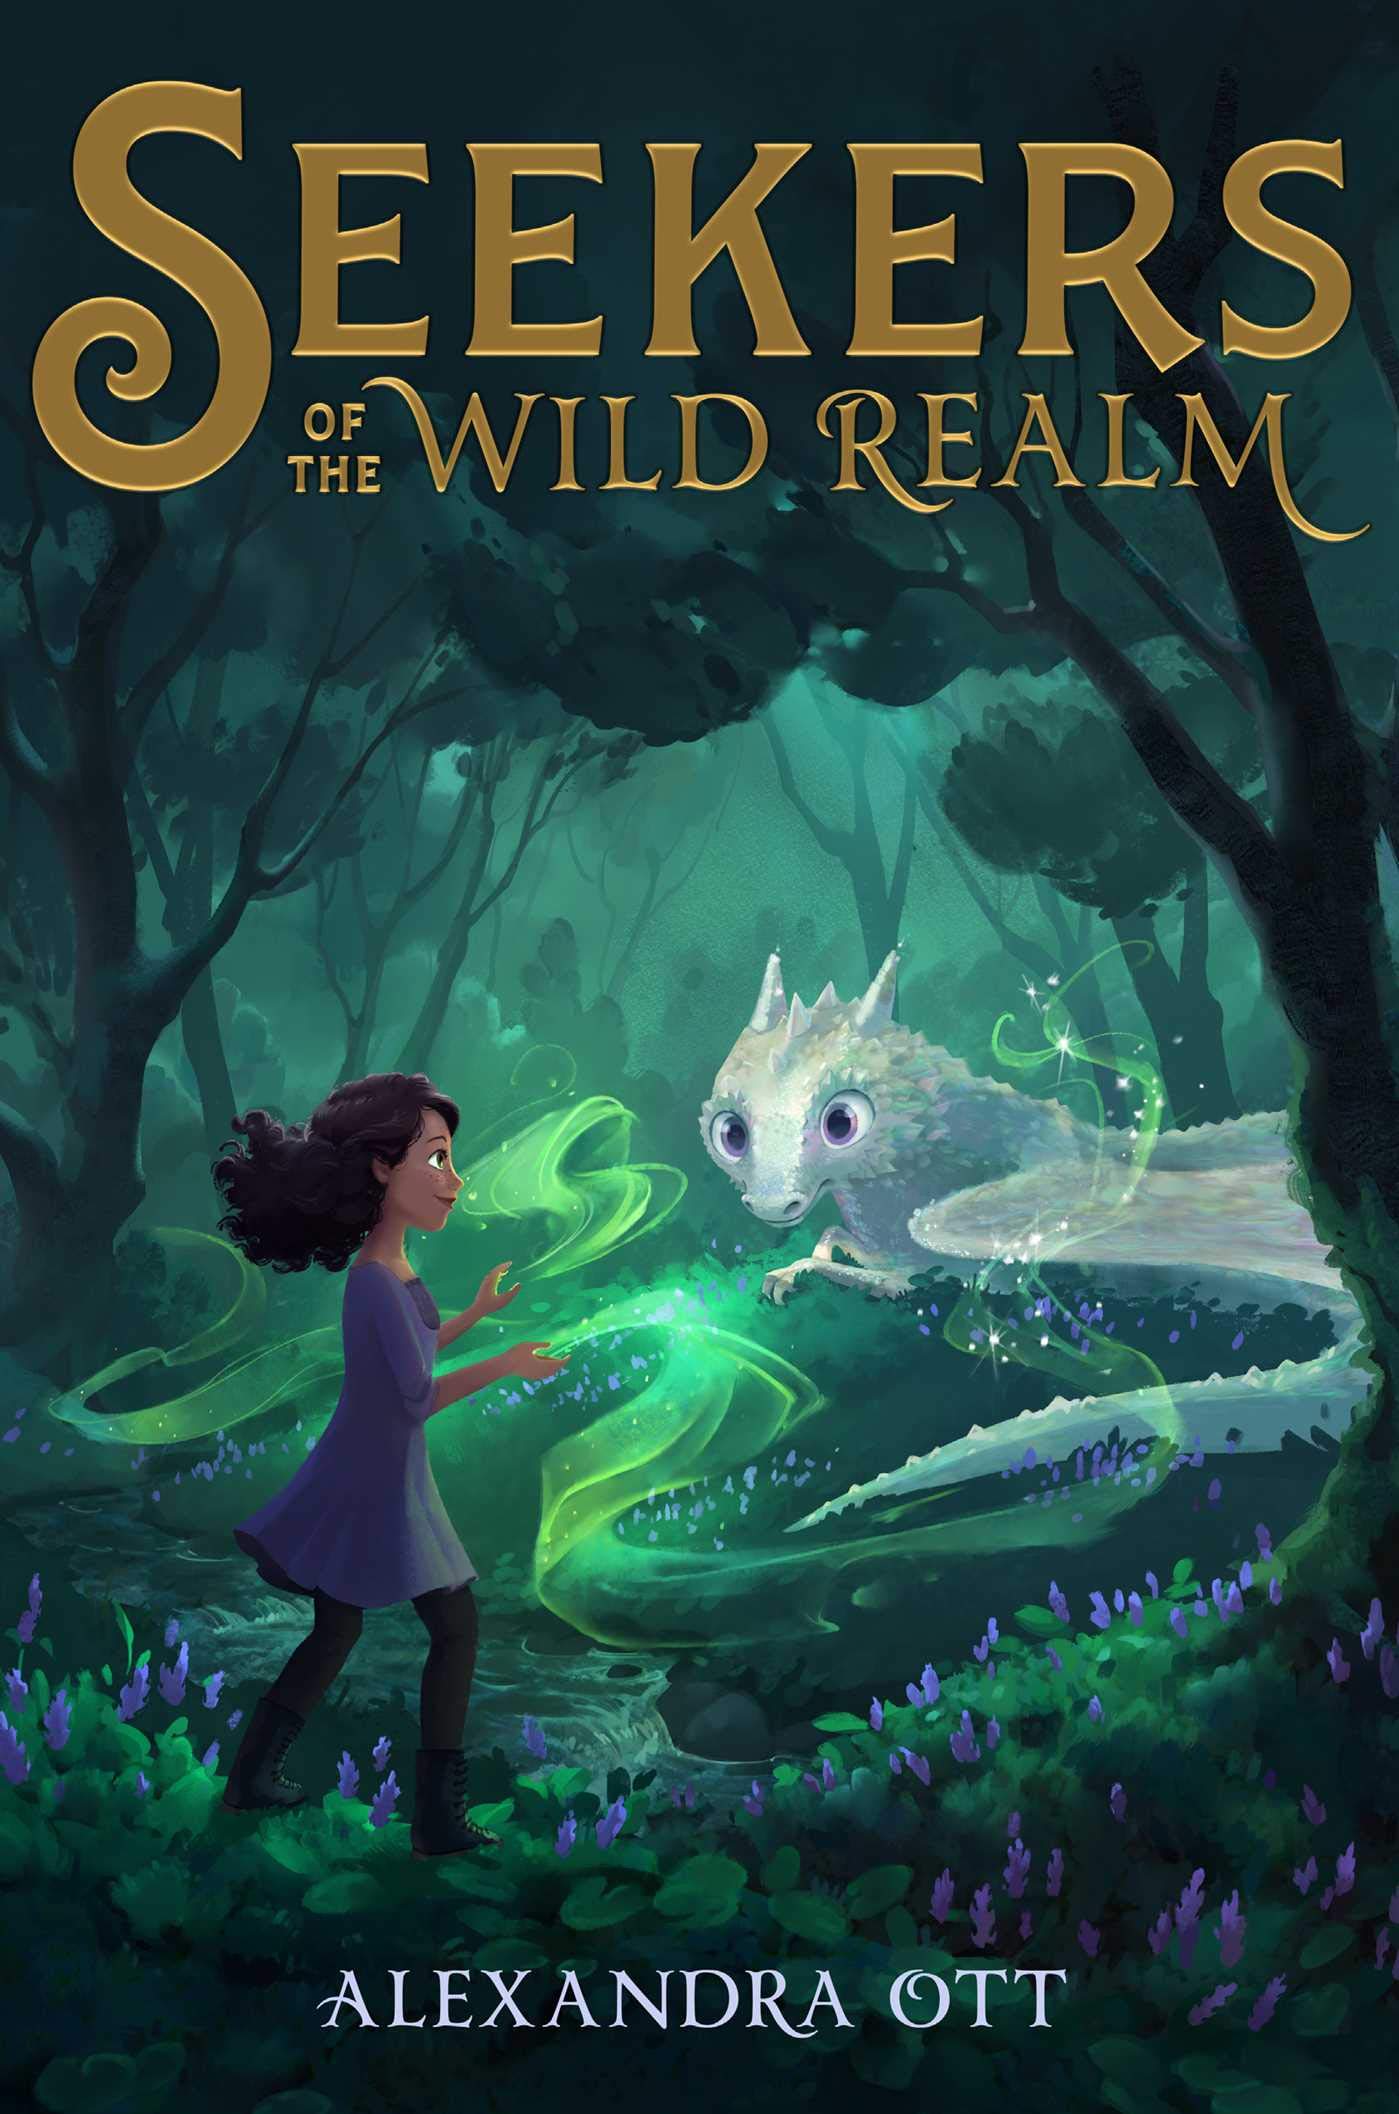 Image for "Seekers of the Wild Realm"